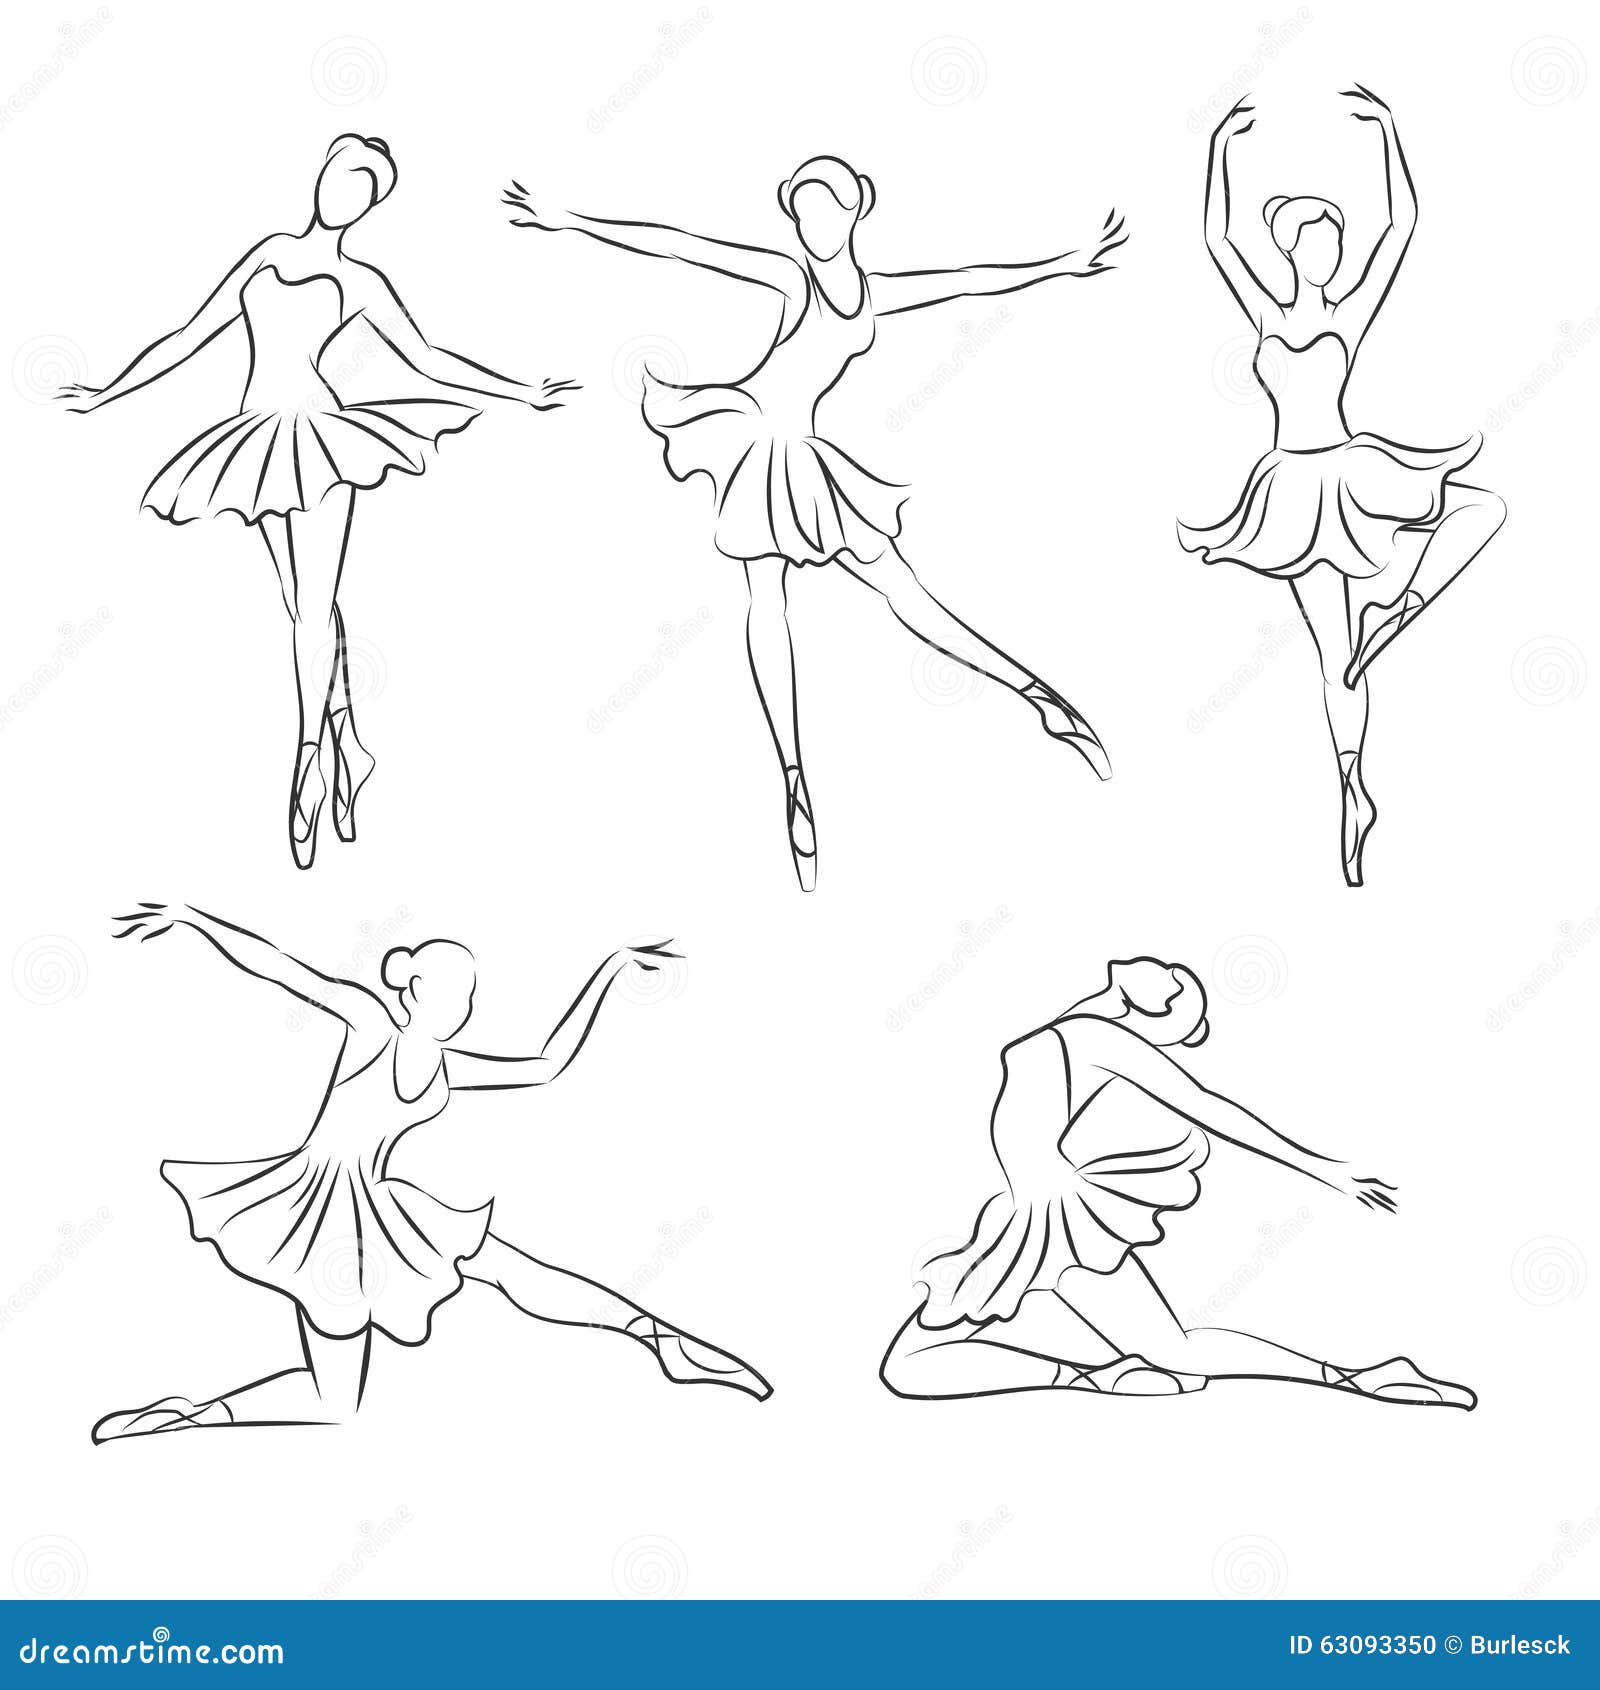 Ballet pose outline Black and White Stock Photos & Images - Alamy